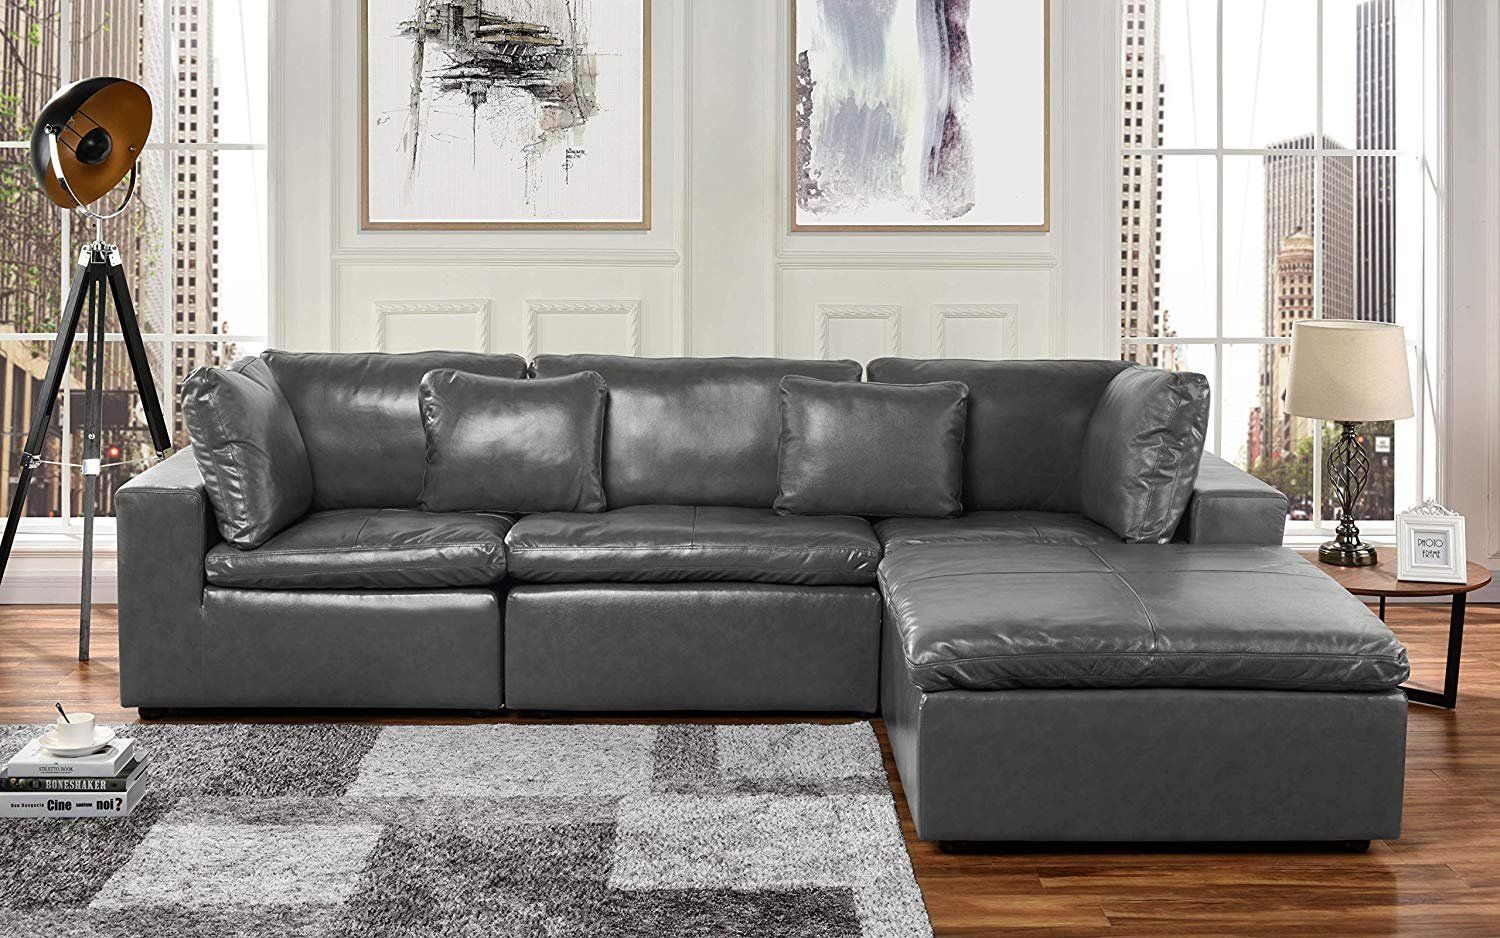 Large Leather Sectional Sofa, L Shape Couch With Wide With Regard To Large Sofa Chairs (View 2 of 15)